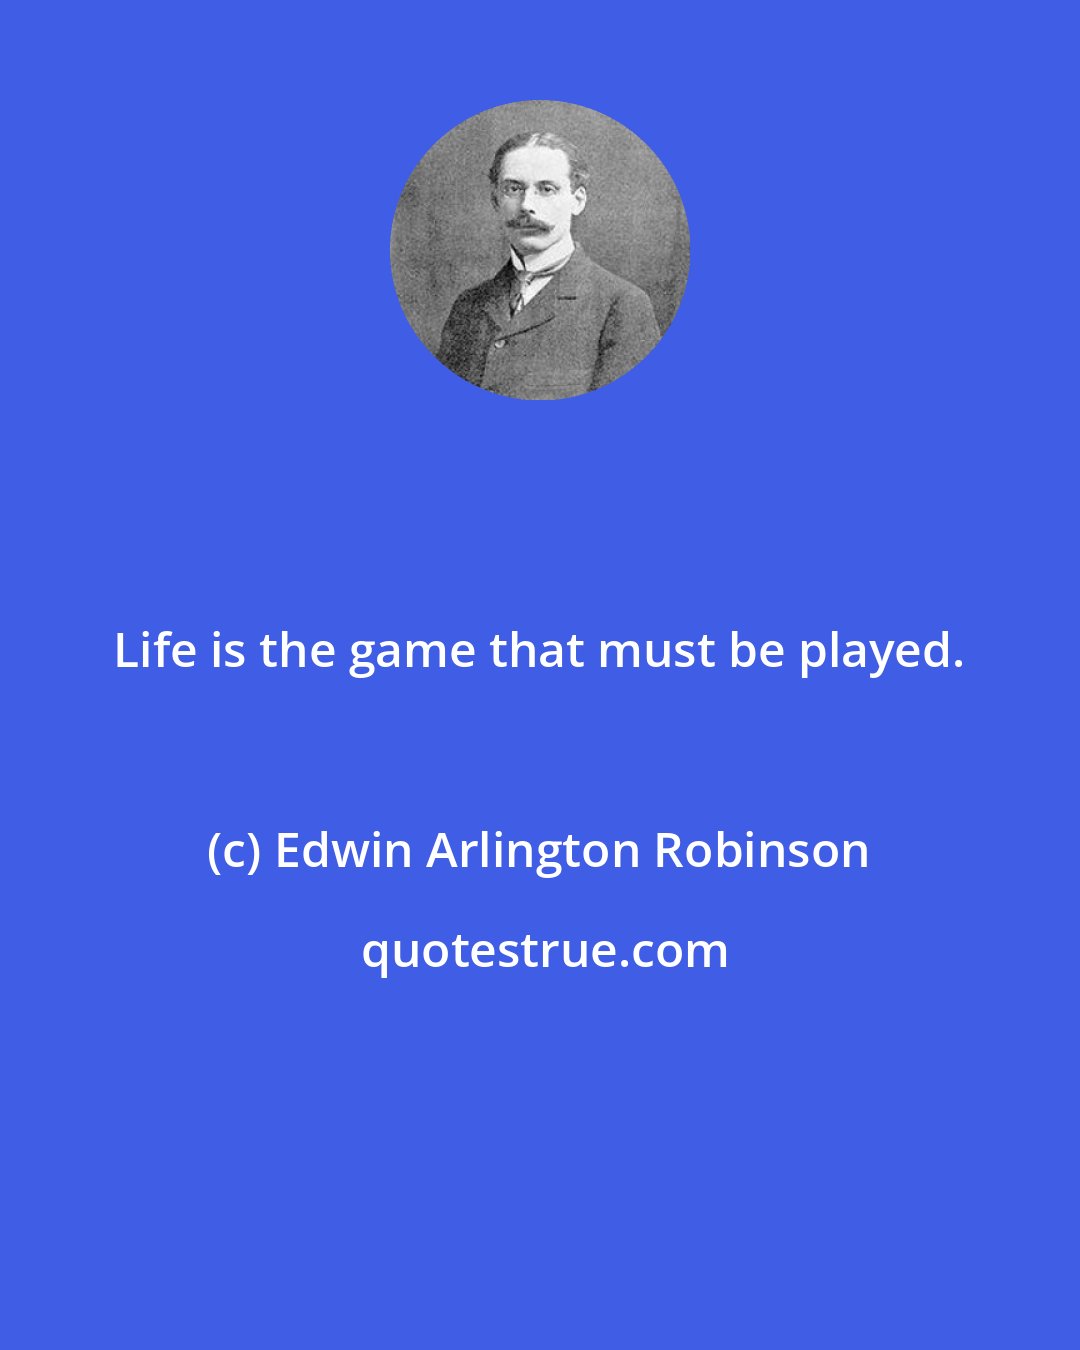 Edwin Arlington Robinson: Life is the game that must be played.